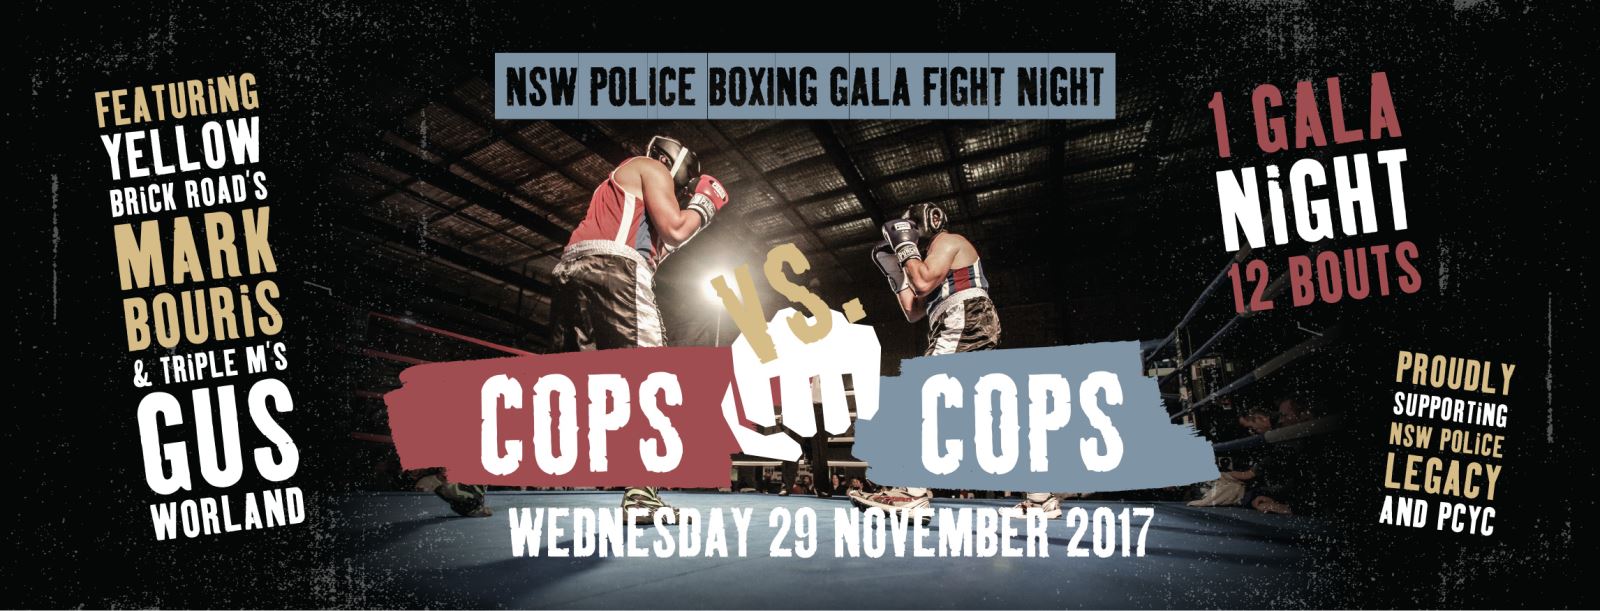 NSW Police Legacy Boxing